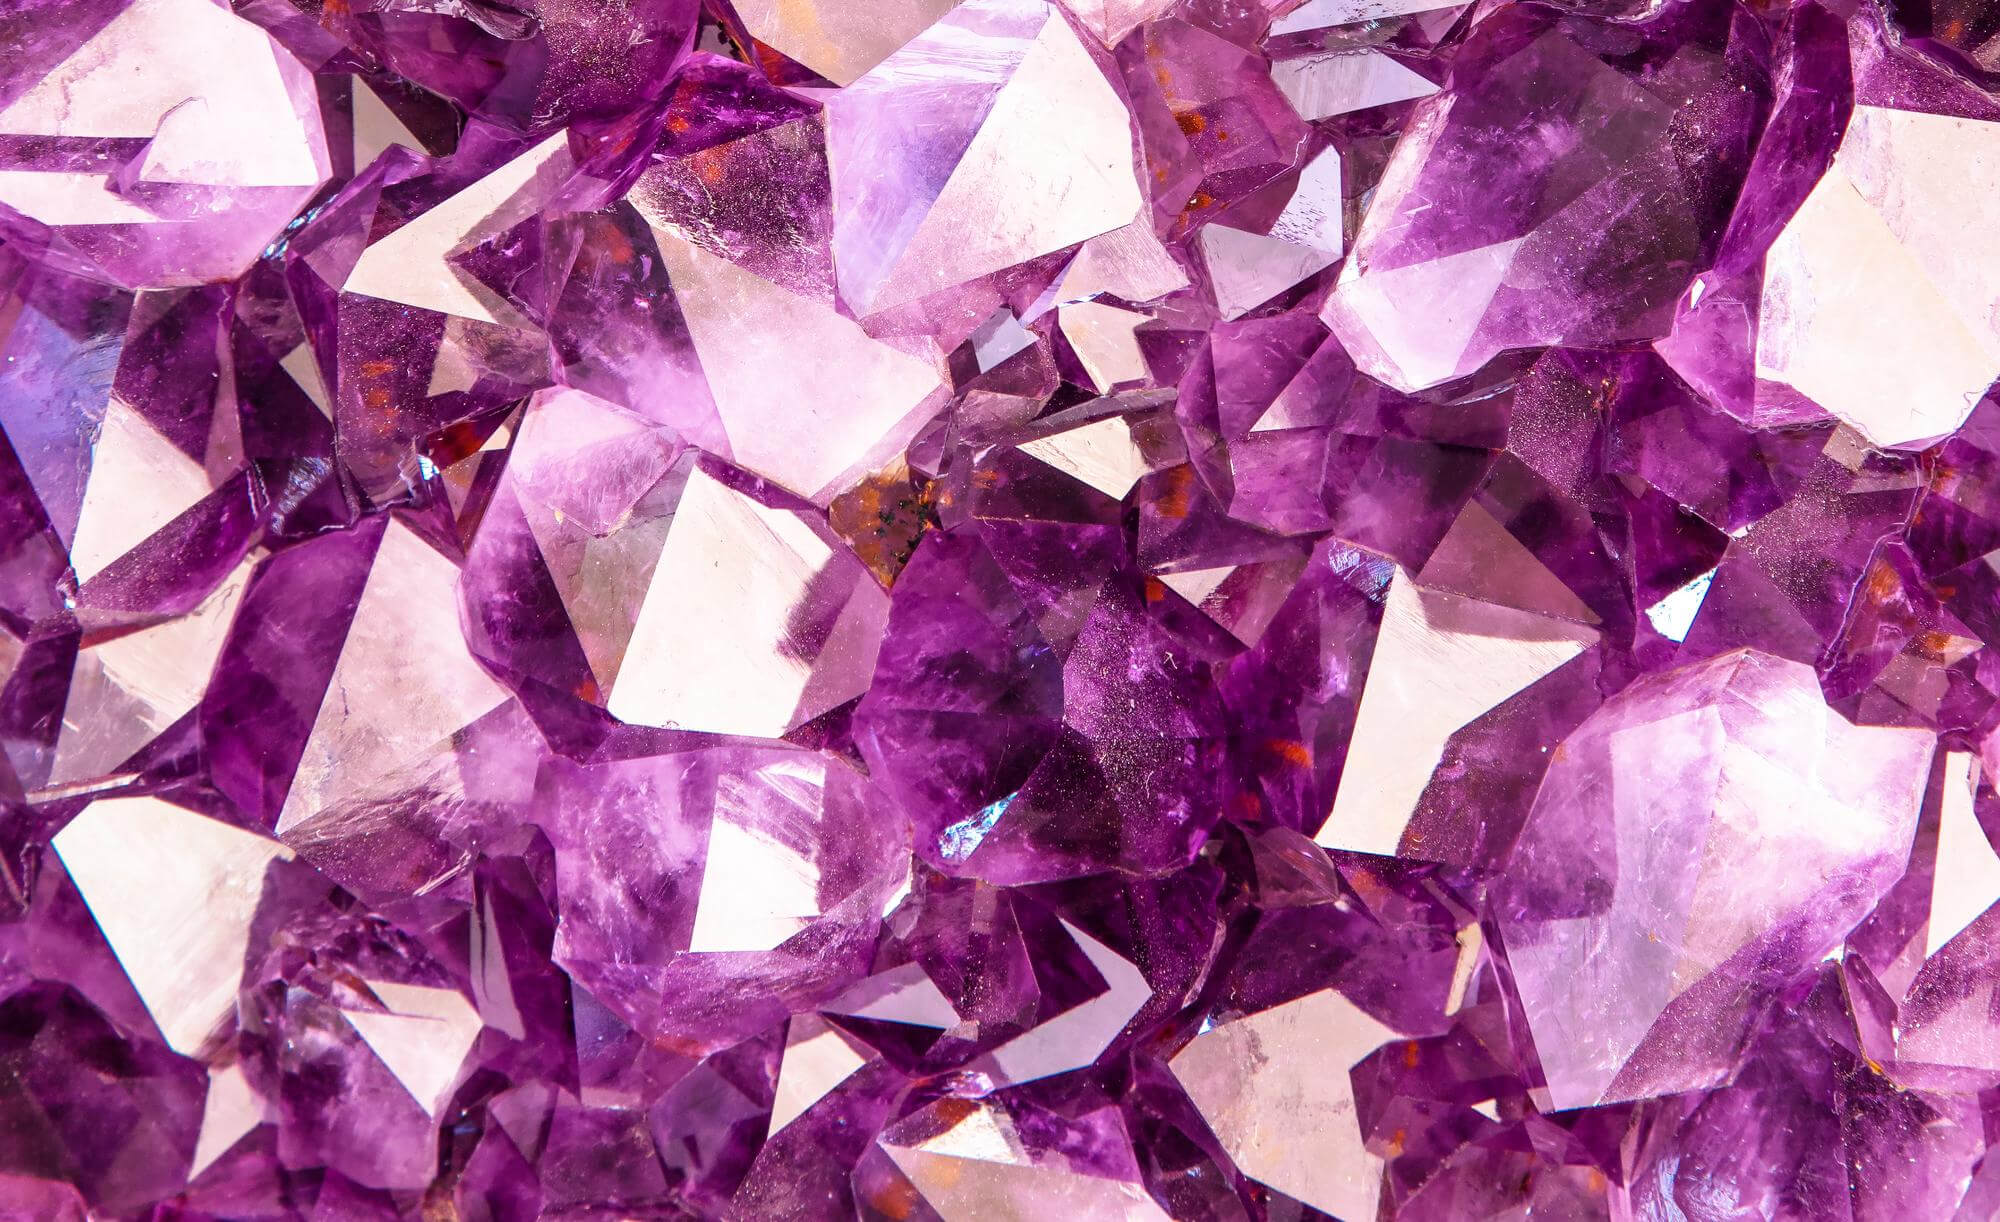 Transform Your Home with Amethyst - Tips and Ideas for Incorporating This Magical Crystal